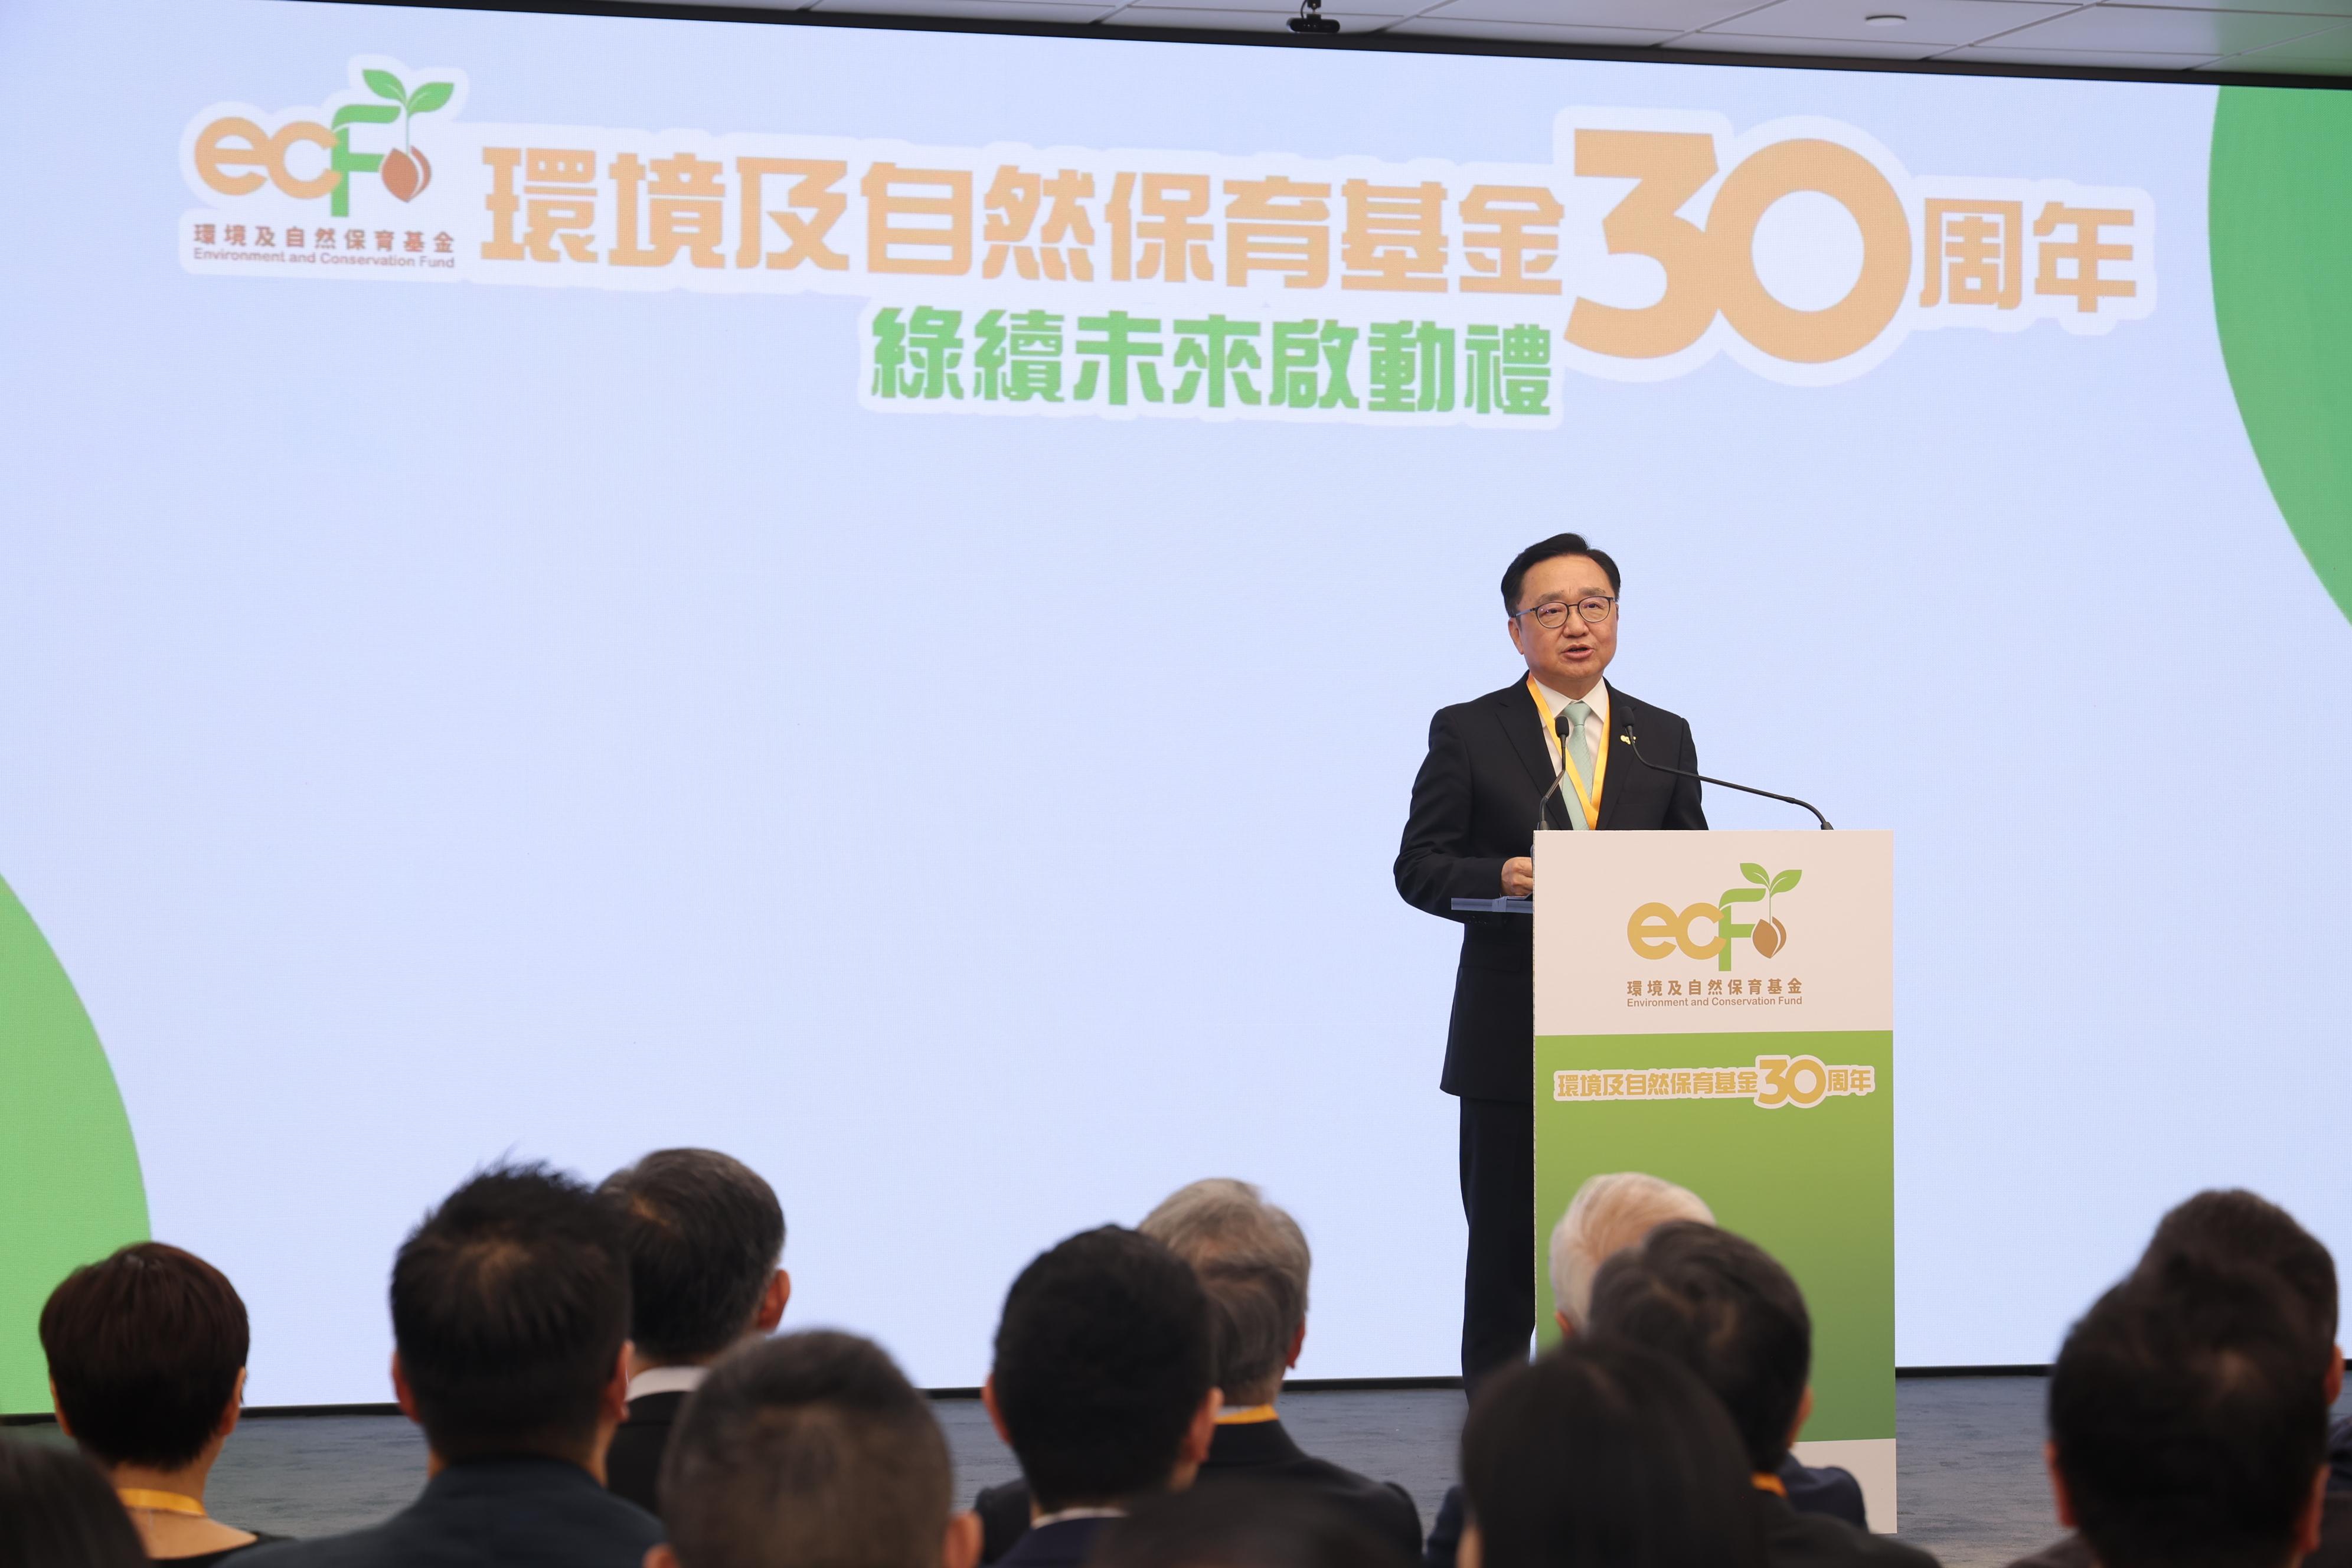 The Environment and Conservation Fund (ECF) 30th anniversary "Let's Grow for Green" launching ceremony was held at the Hong Kong Productivity Council Building in Kowloon today (June 3). Photo shows the Chairman of the ECF Committee, Dr Eric Cheng, delivering his welcome remarks at the launching ceremony.